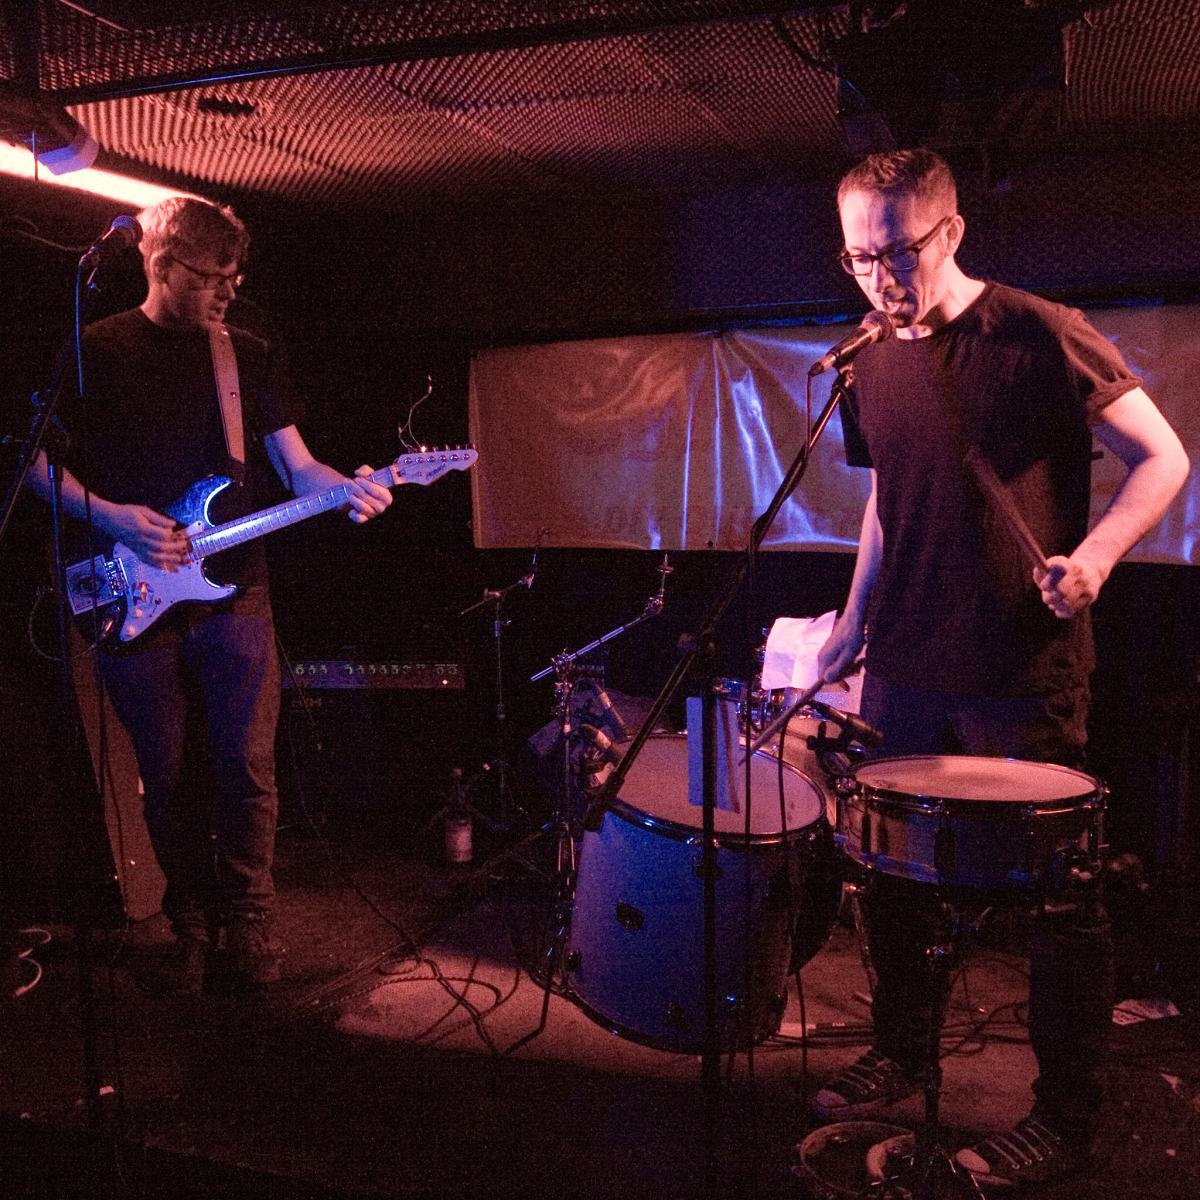 Humousexual @ Bent Fest, Power Lunches, 5th April 2015